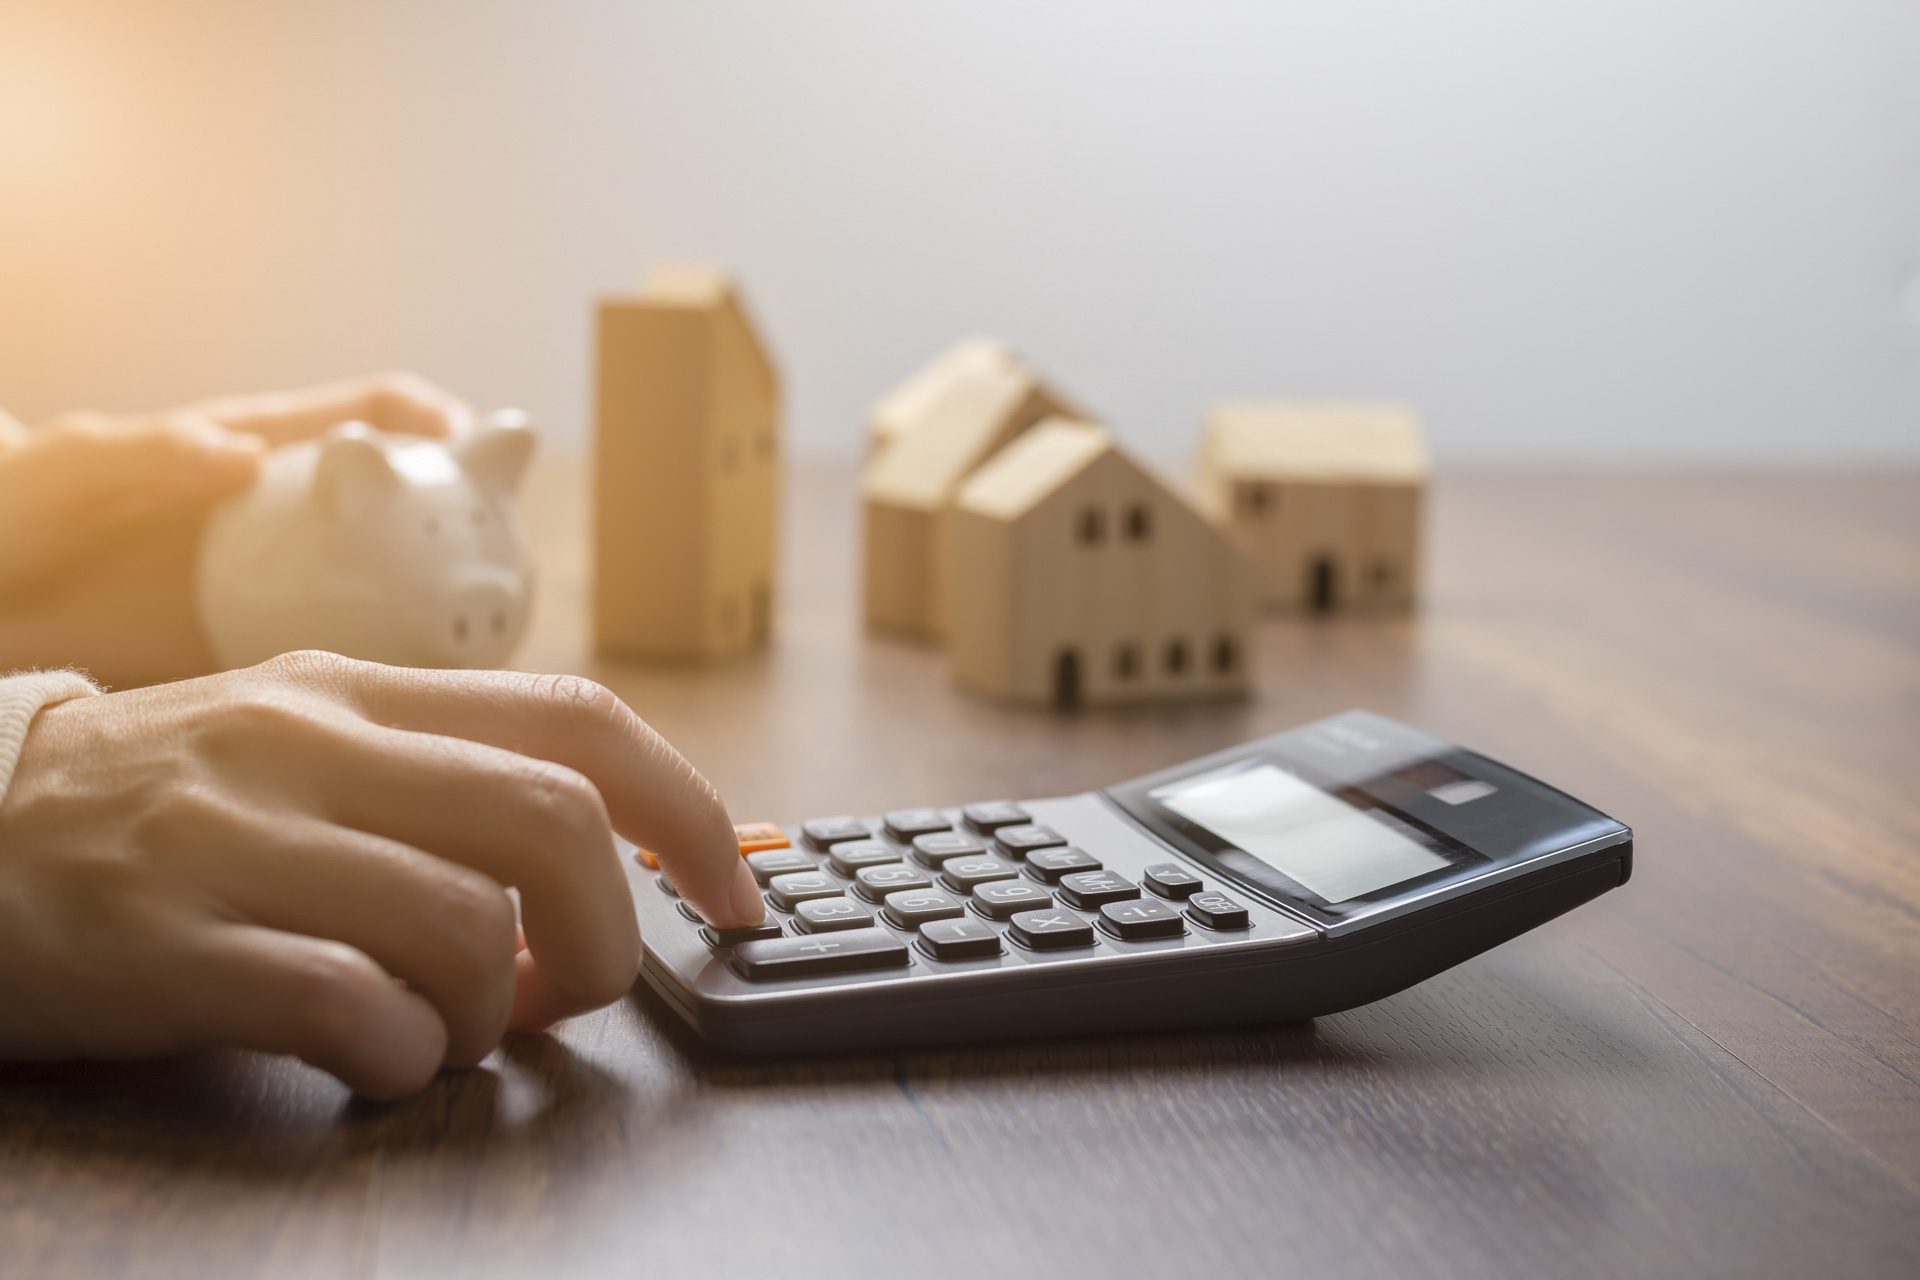 The hand is pressing calculators, piggy bank with wooden house. buy or rent question on note with calculators on desk. Property investment calculations